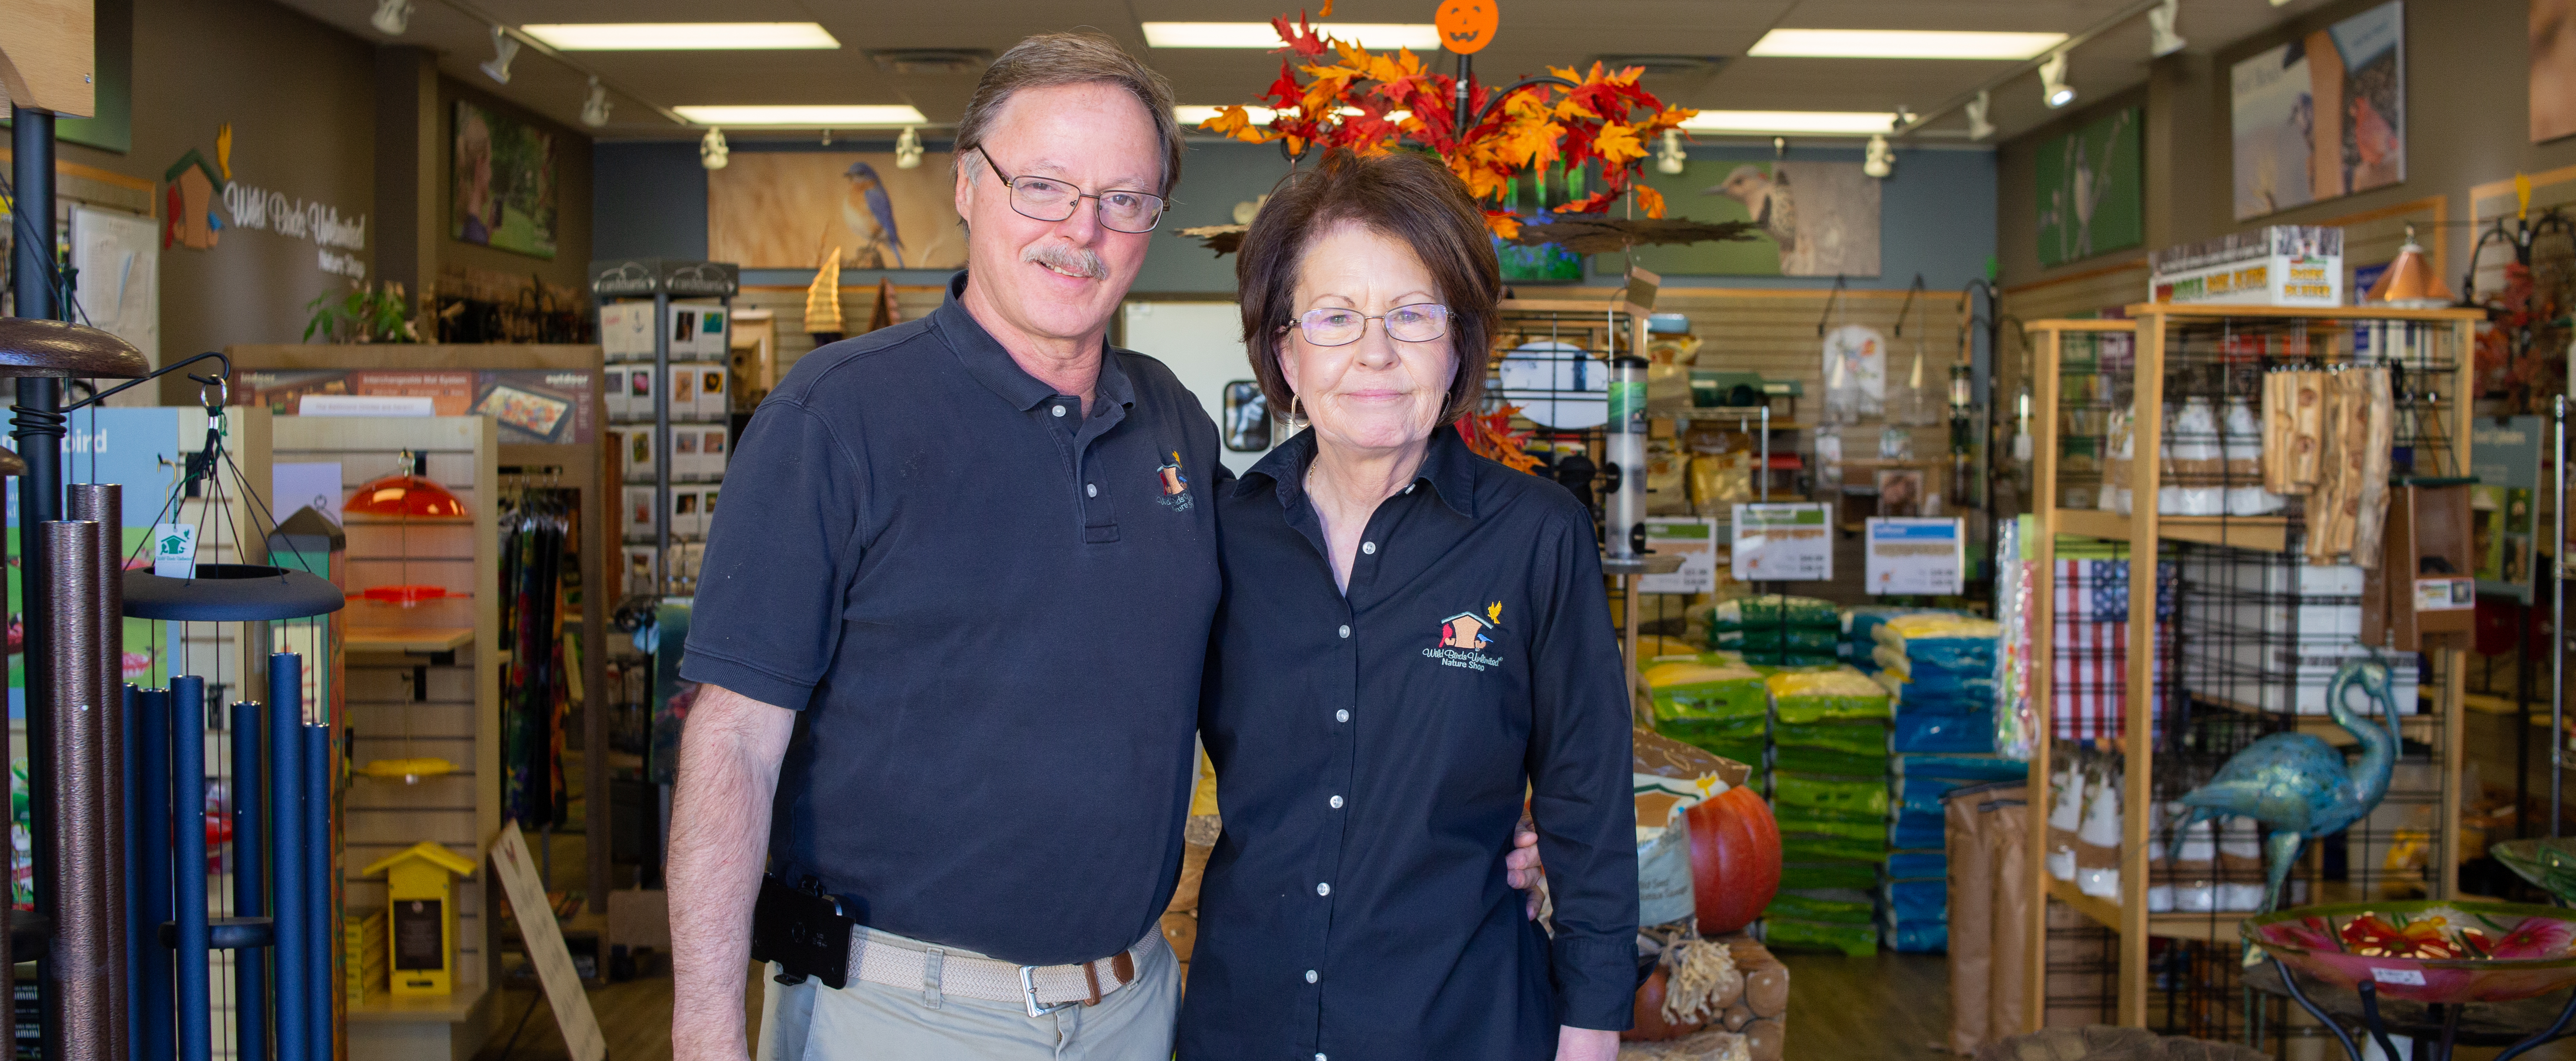 Rich and Diane Duloft standing in their store